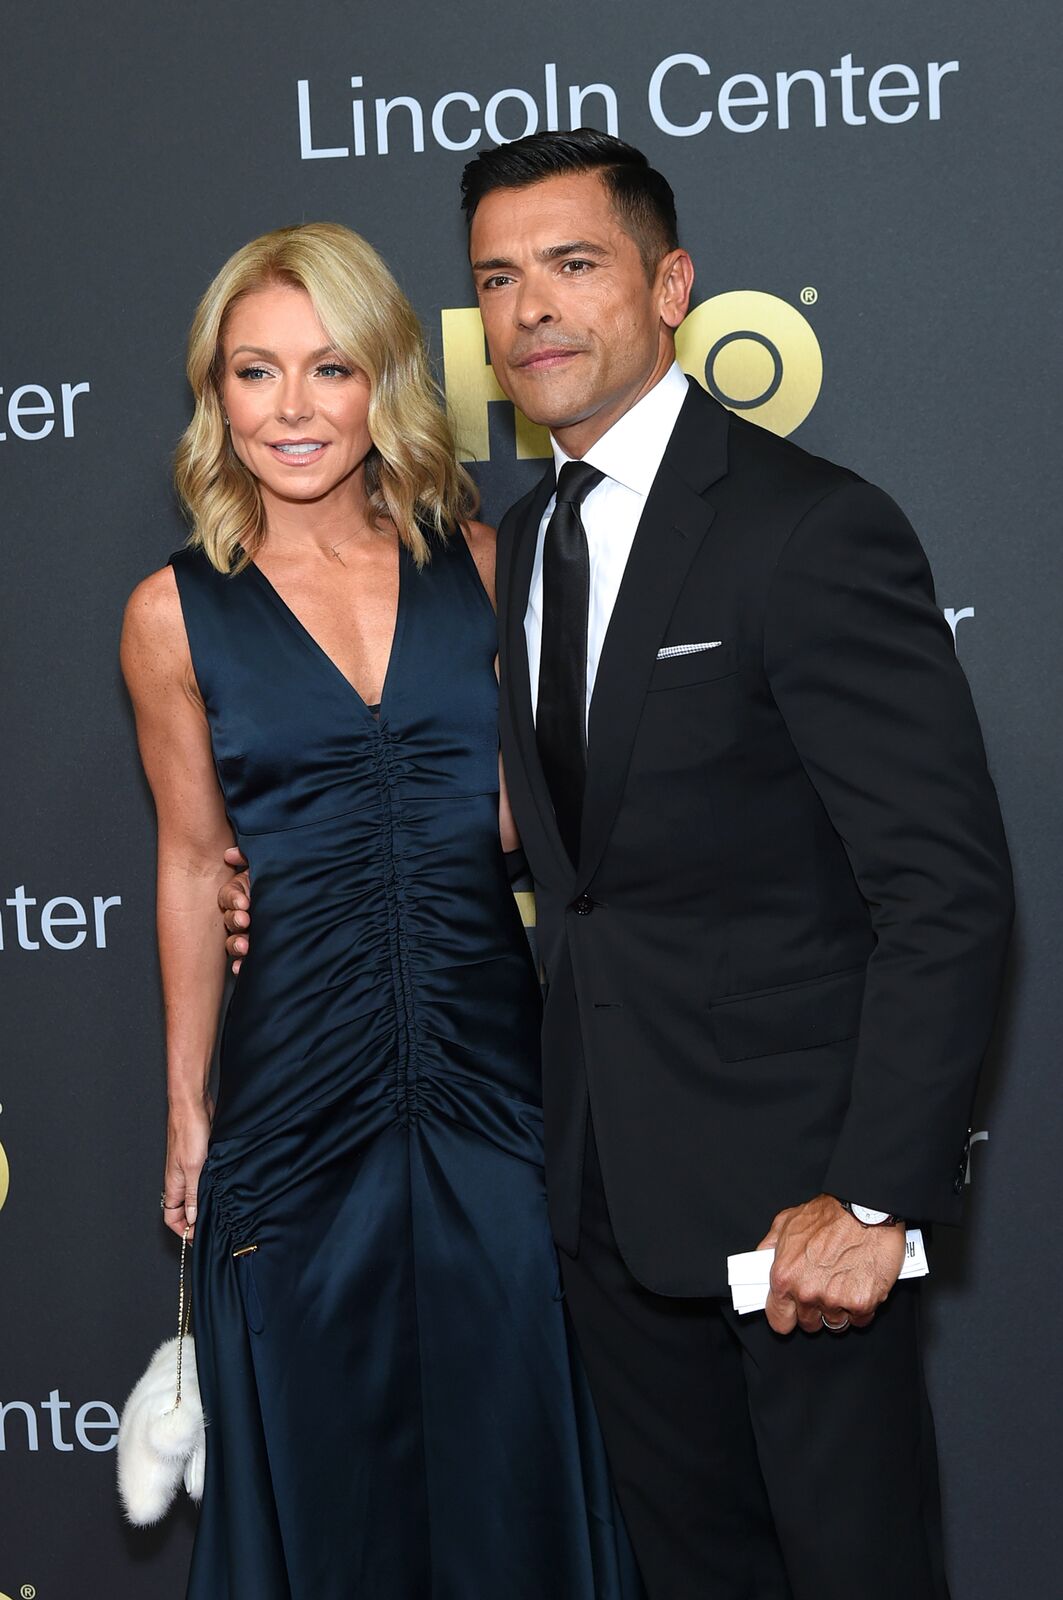 Actors Kelly Ripa (L) and Mark Consuelos attend Lincoln Center's American Songbook Gala at Alice Tully Hall on May 29, 2018 in New York City | Photo: Getty Images